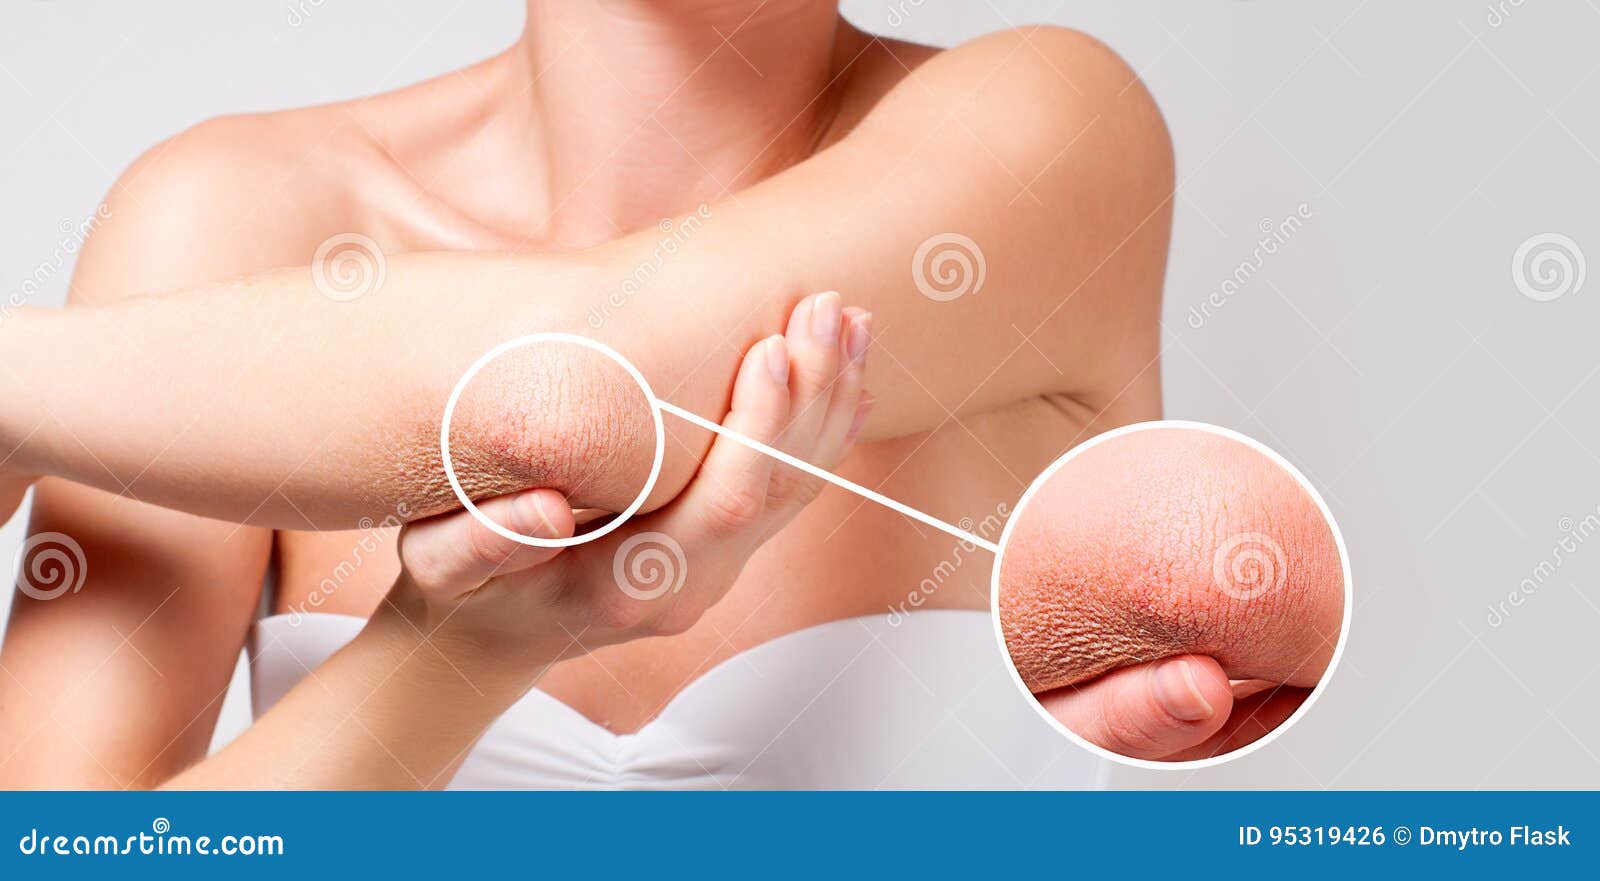 body care. woman has dry skin on elbow.